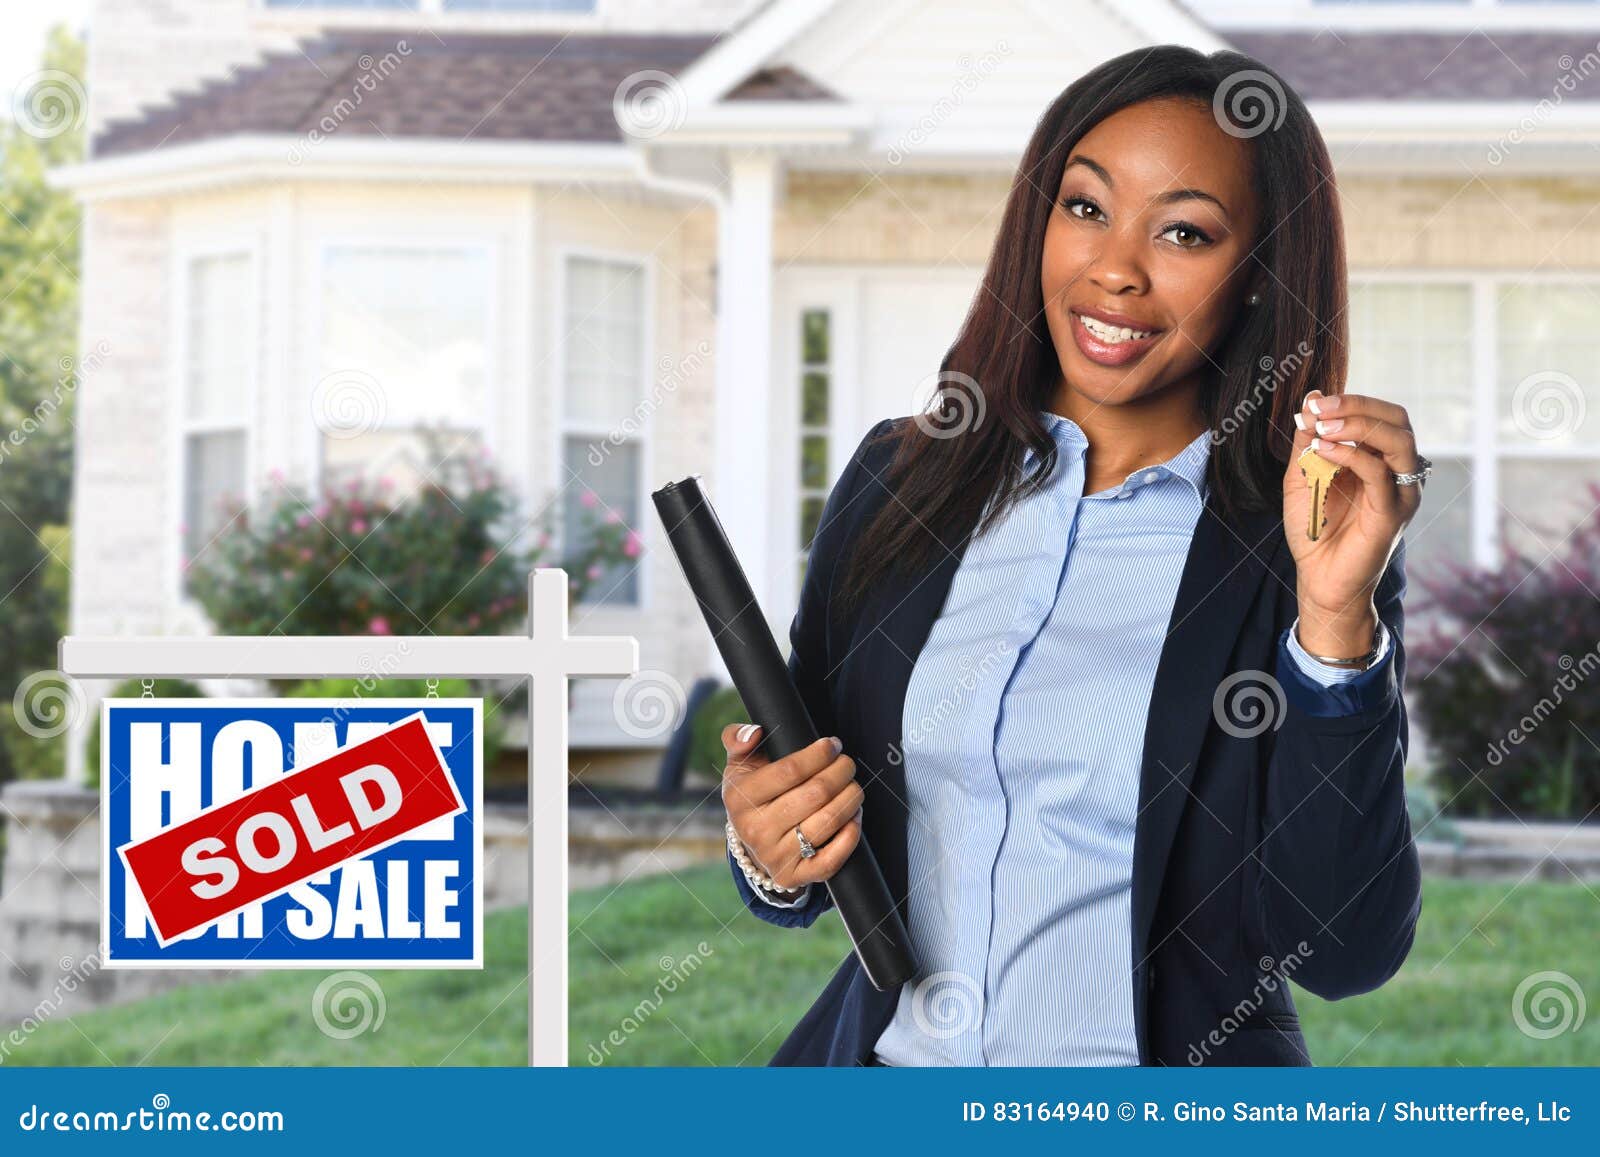 real estate agent black free pics and video